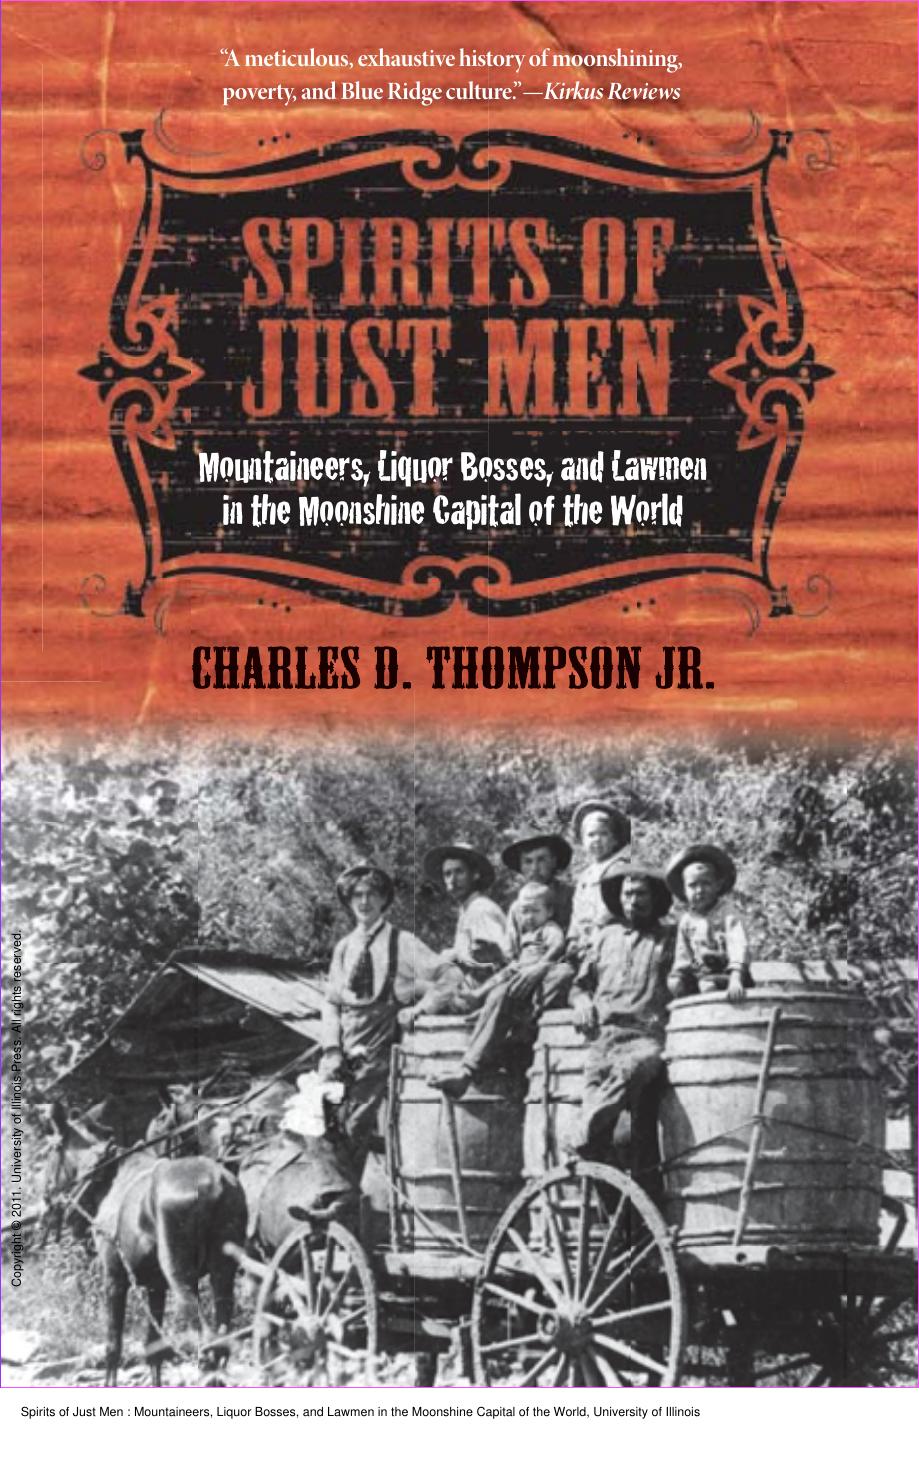 Spirits of Just Men : Mountaineers, Liquor Bosses, and Lawmen in the Moonshine Capital of the World by Charles D. Thompson Jr